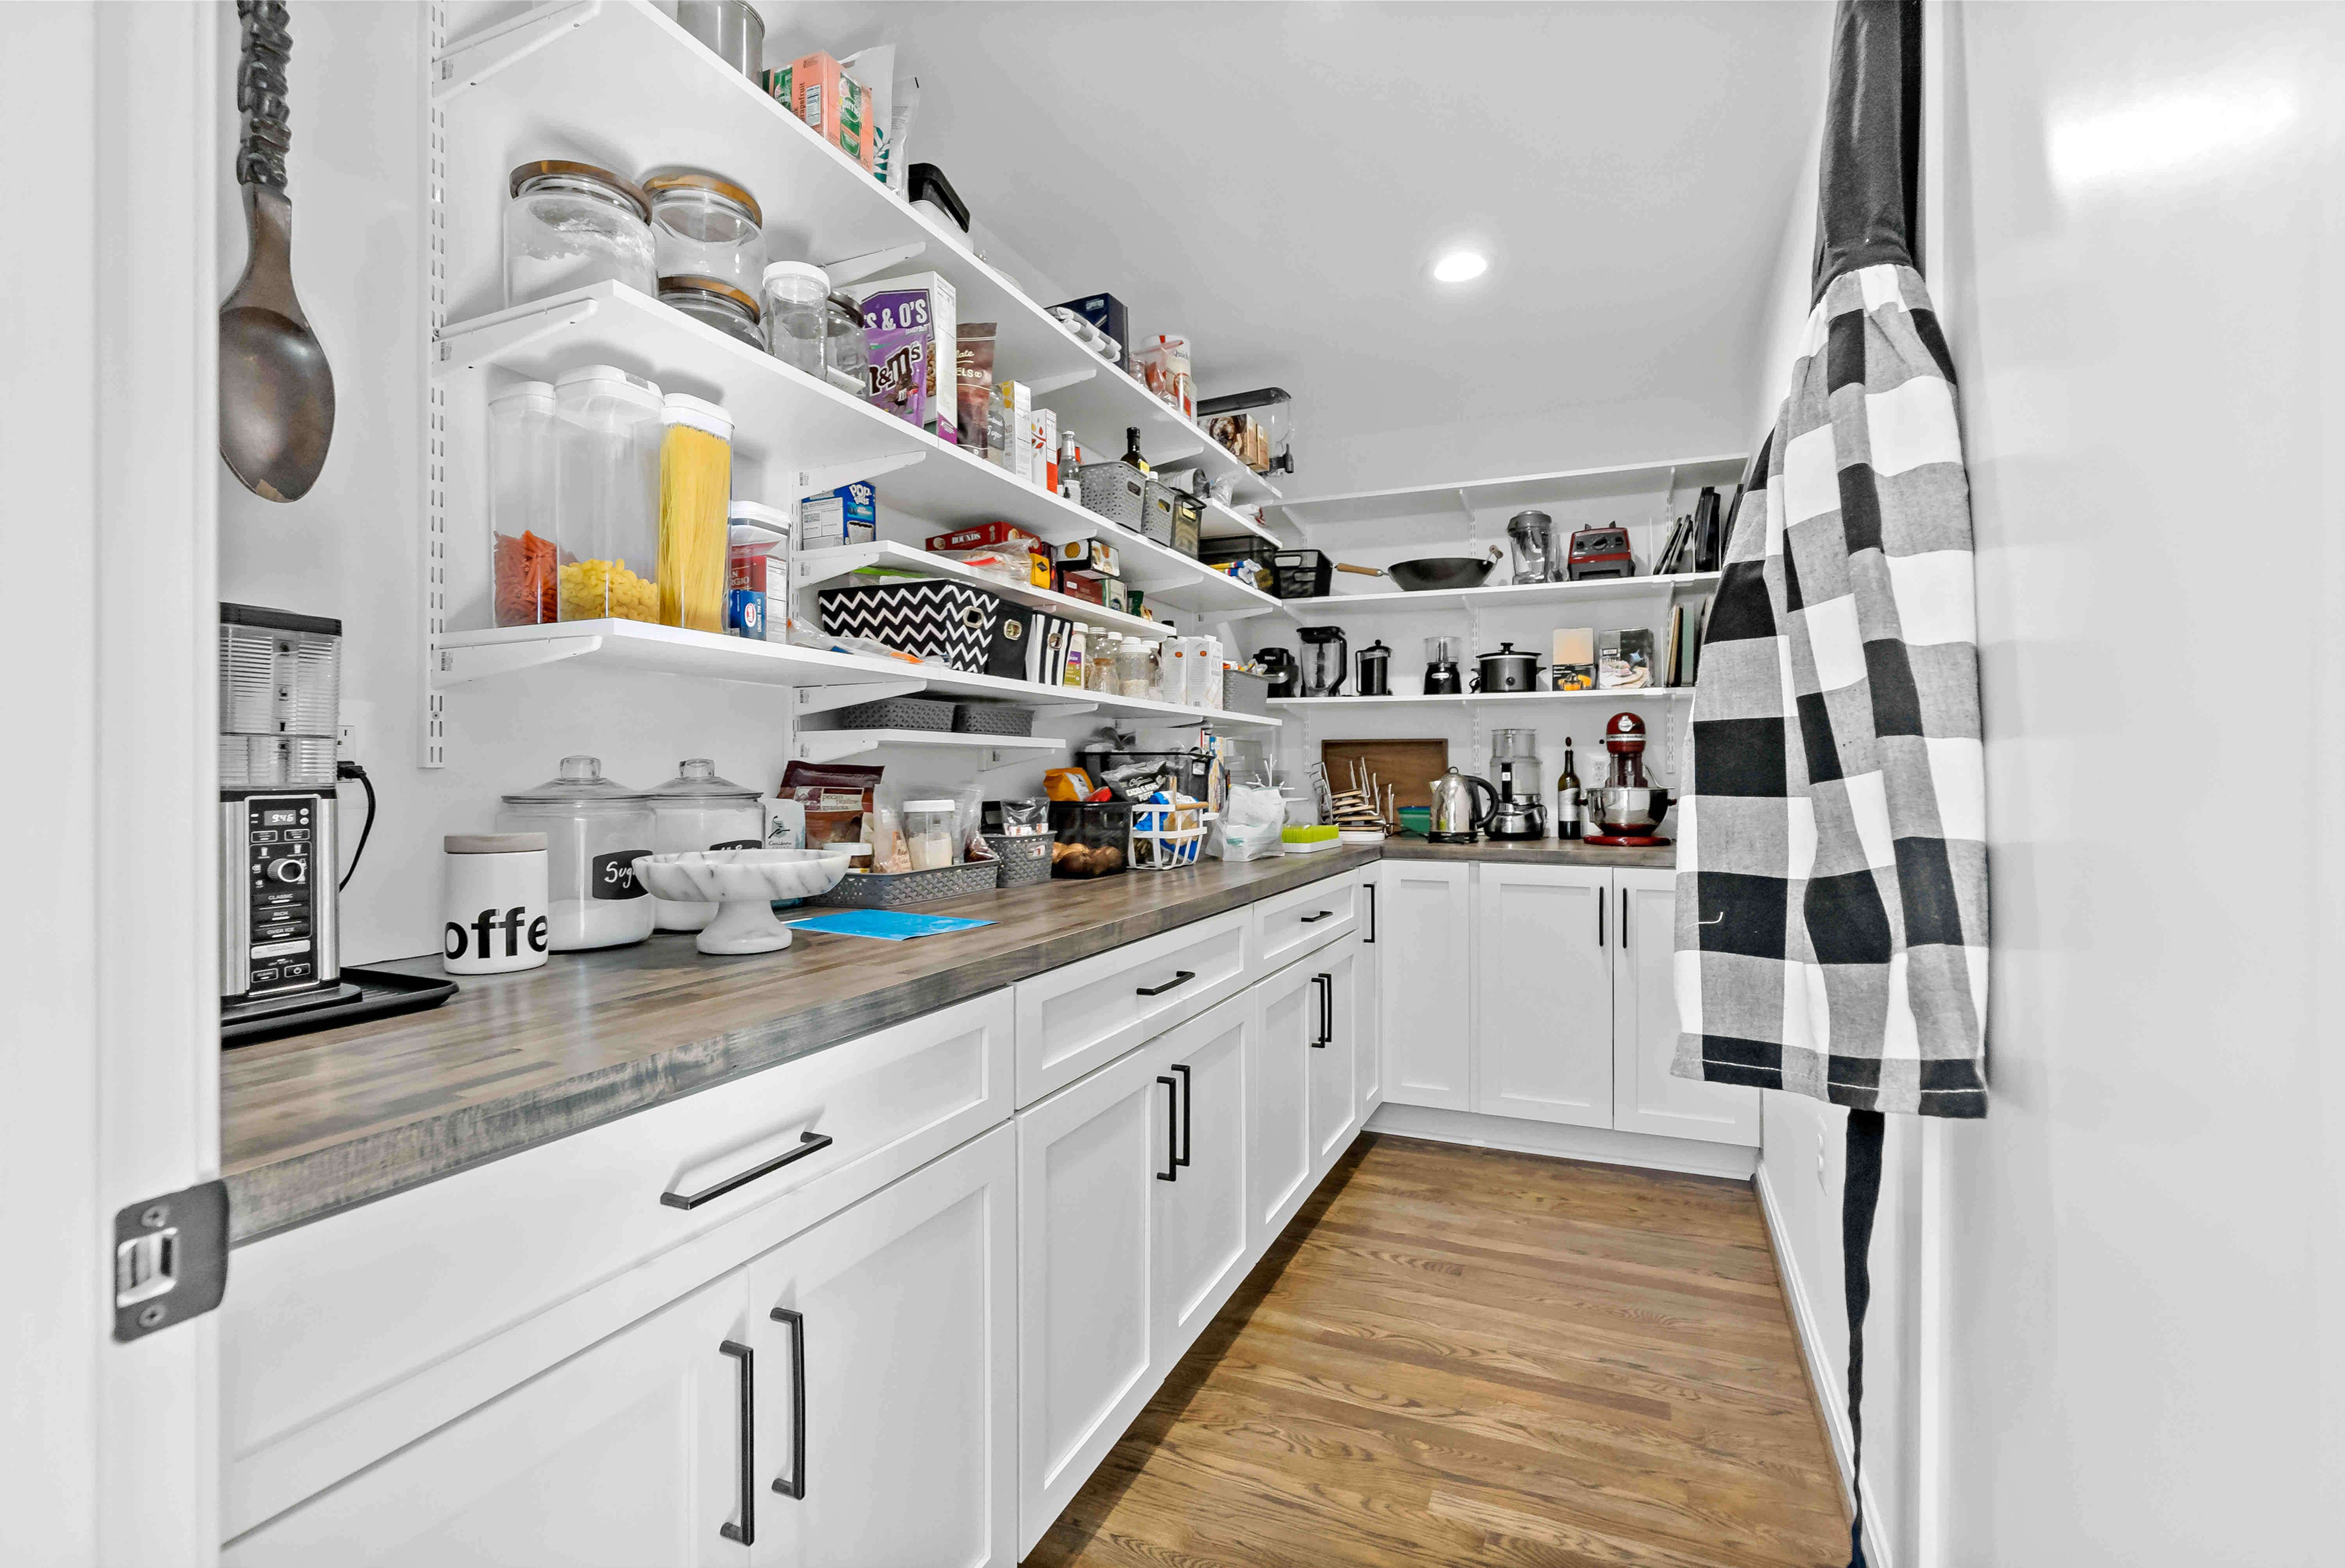 Walk-in kitchen pantry with floating shelves